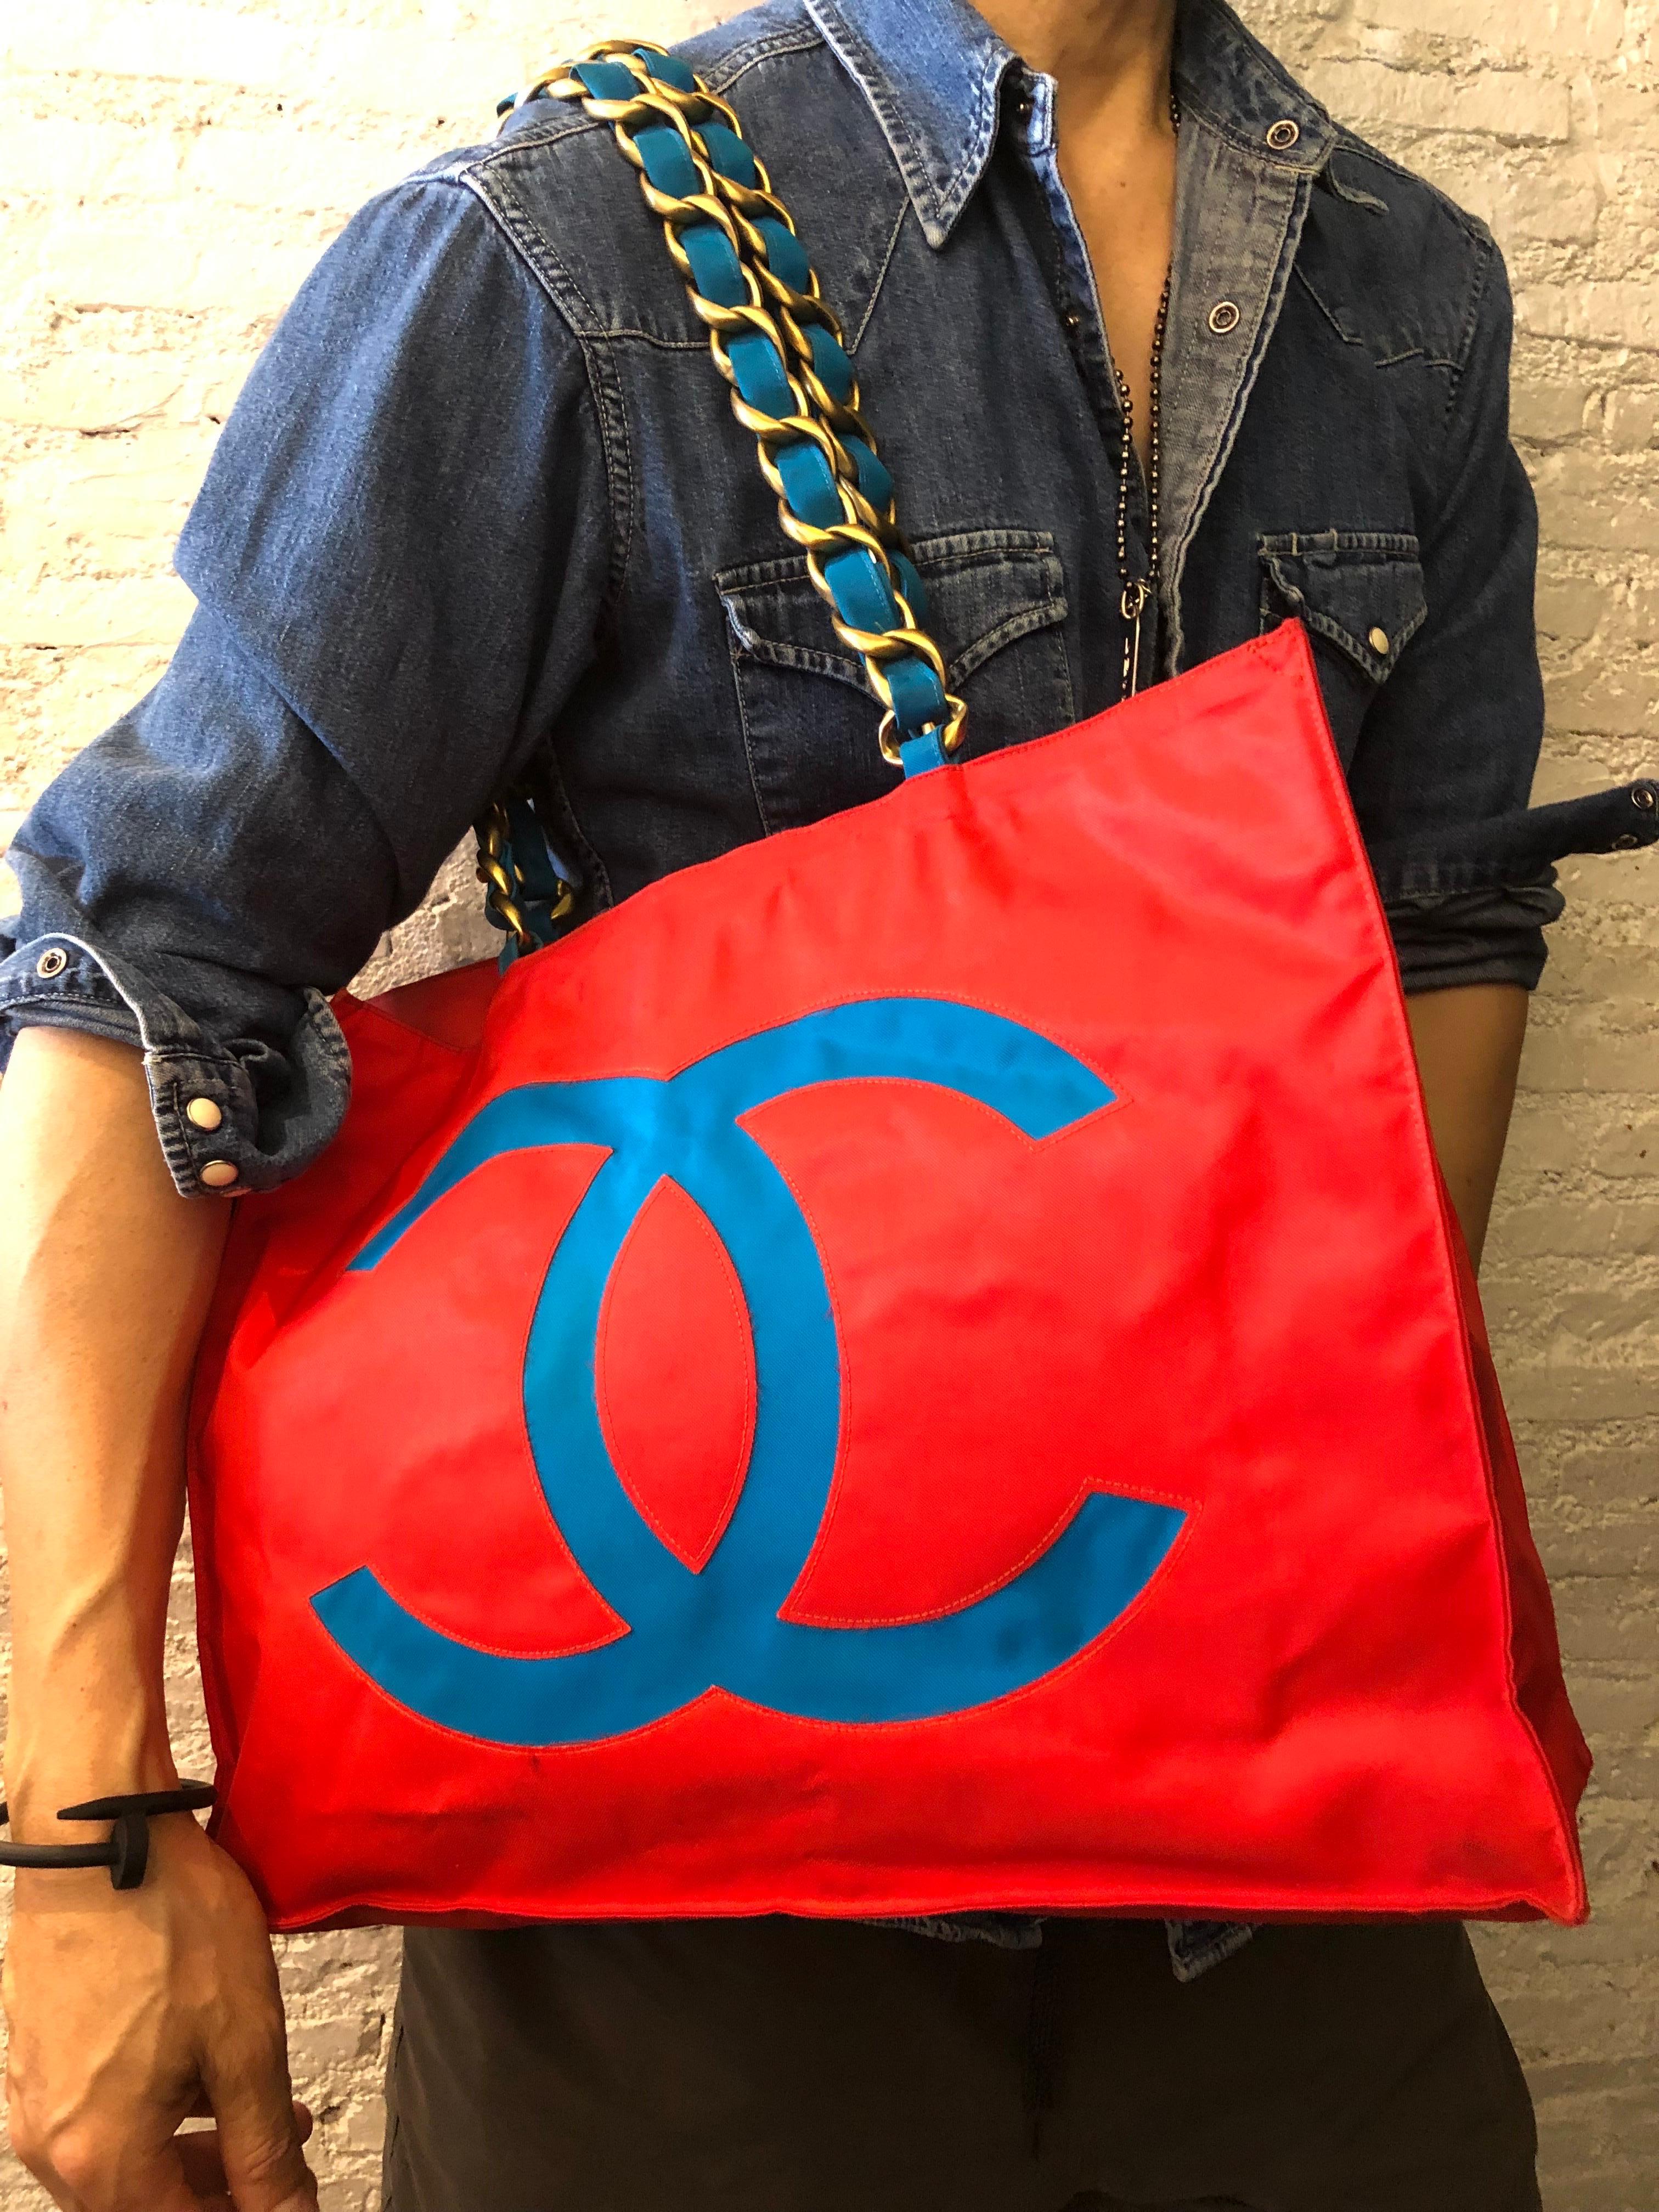 This vintage CHANEL jumbo chain tote is crafted of nylon in red and turquoise featuring a massive cut-out CC logo on one side and cut-out CHANEL letters on the other in turquoise. This tote has two sturdy gold toned shoulder chains interlaced with